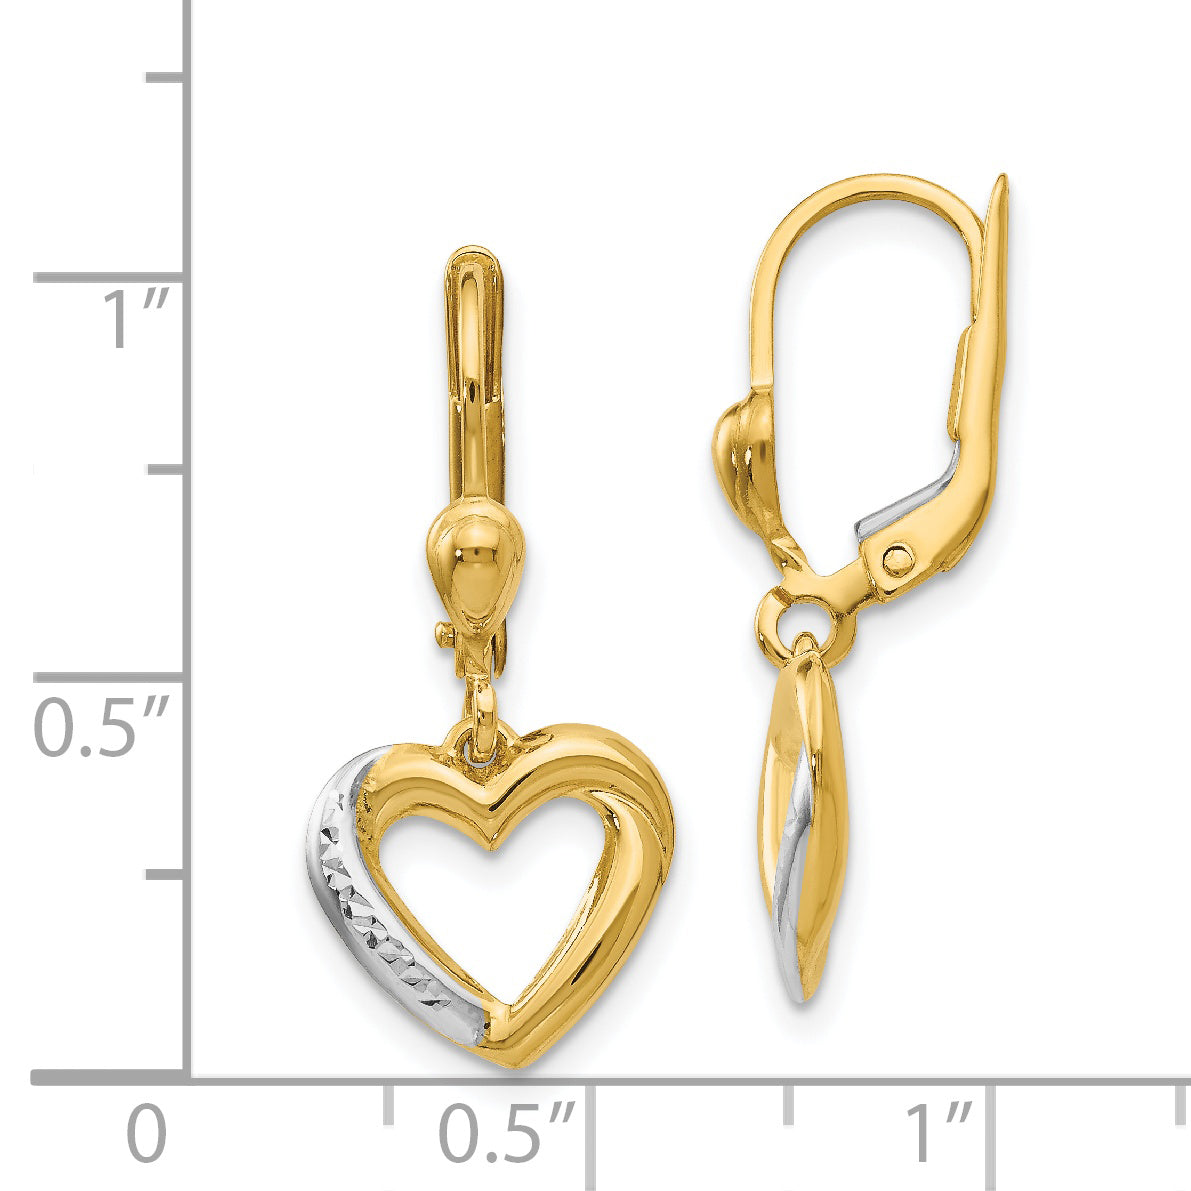 14K and Rhodium Textured and Polished Heart Leverback Earring